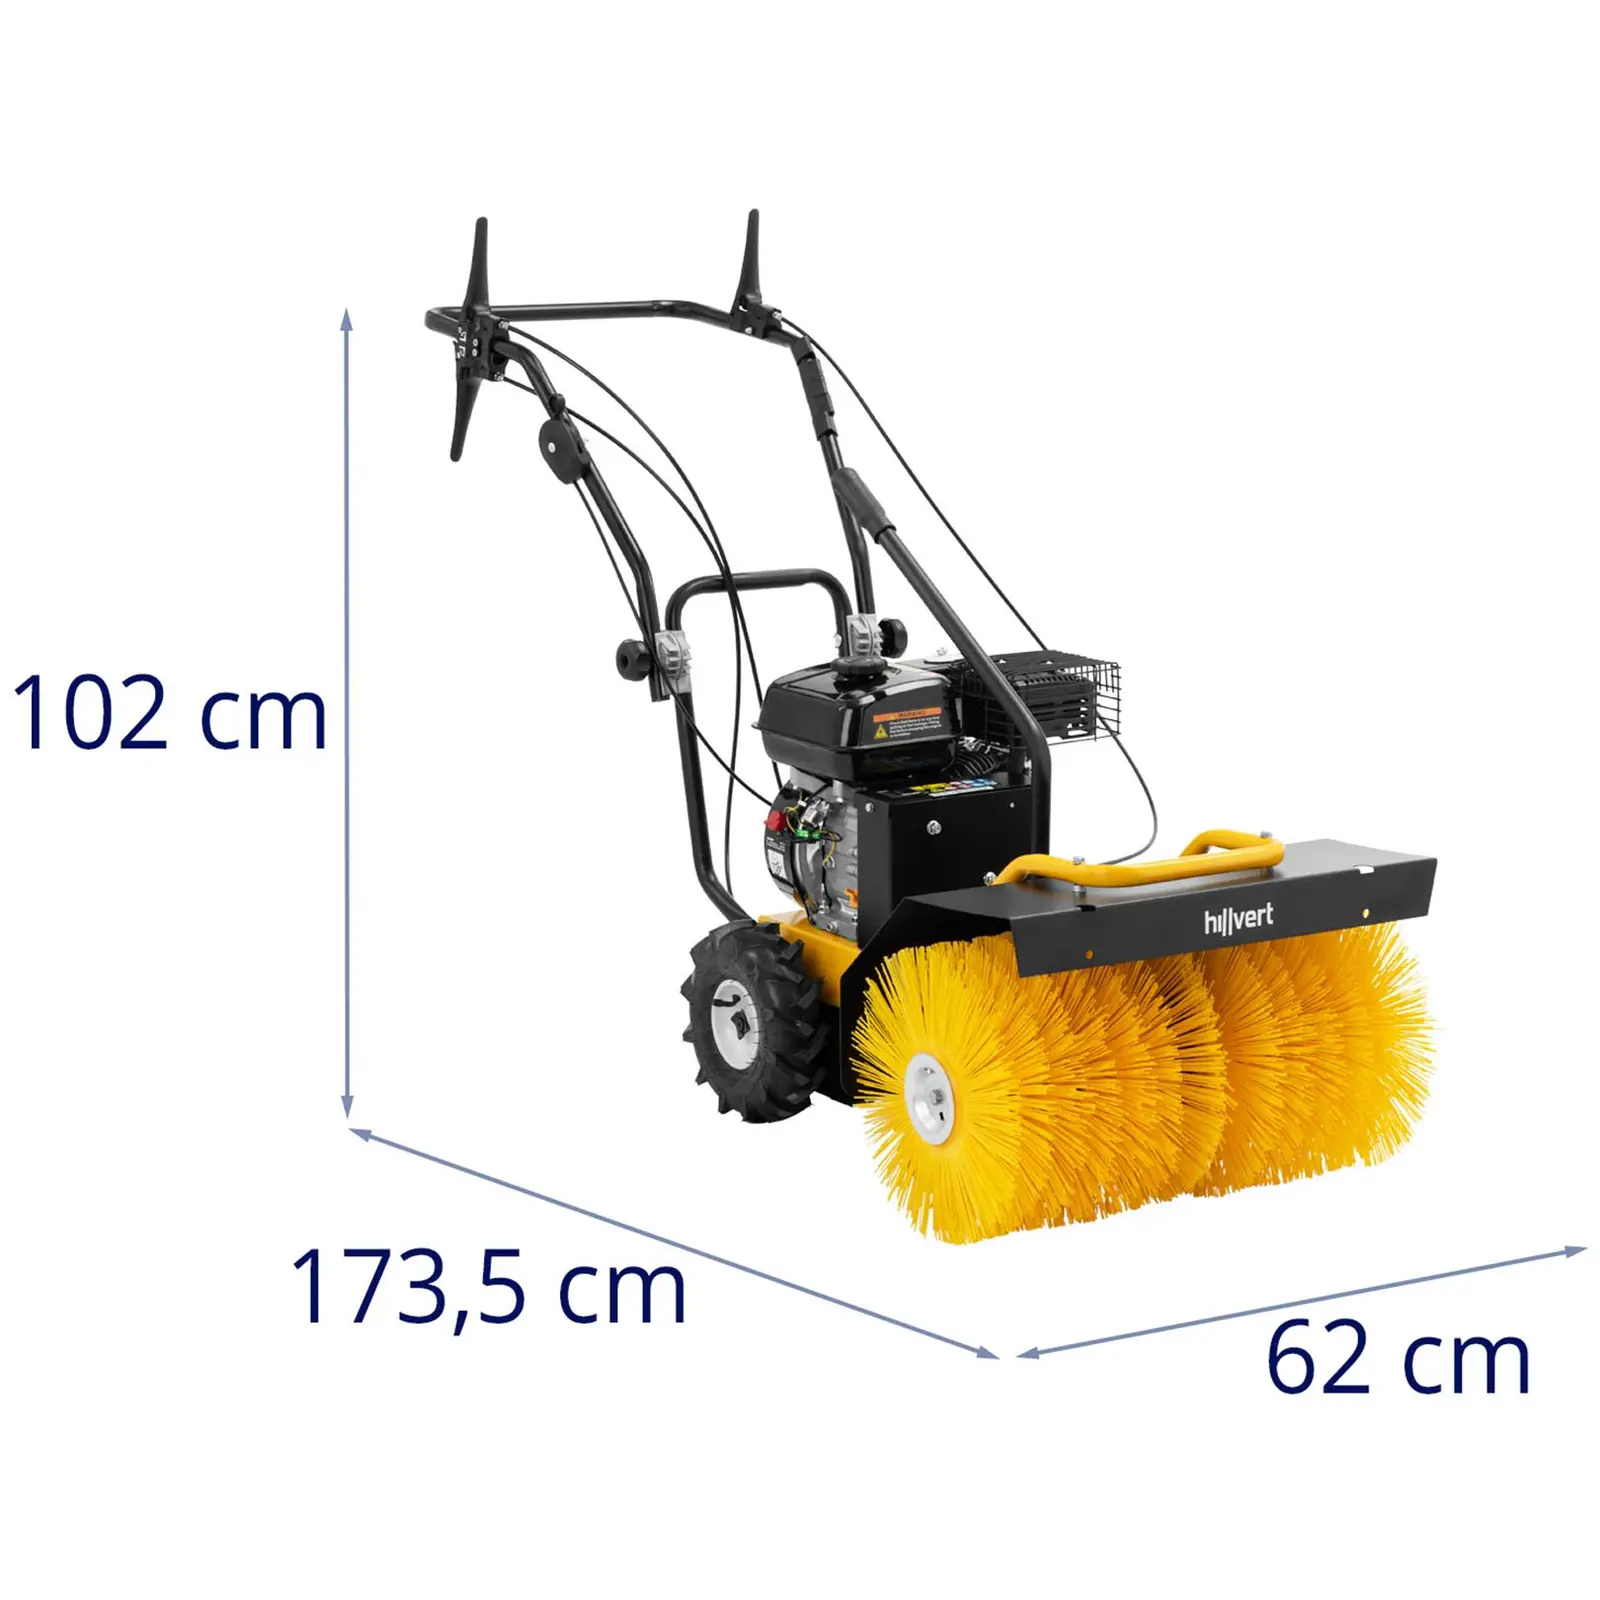 Factory second Lawn Sweeper - 208cc, 4.1kW - 700 mm working width